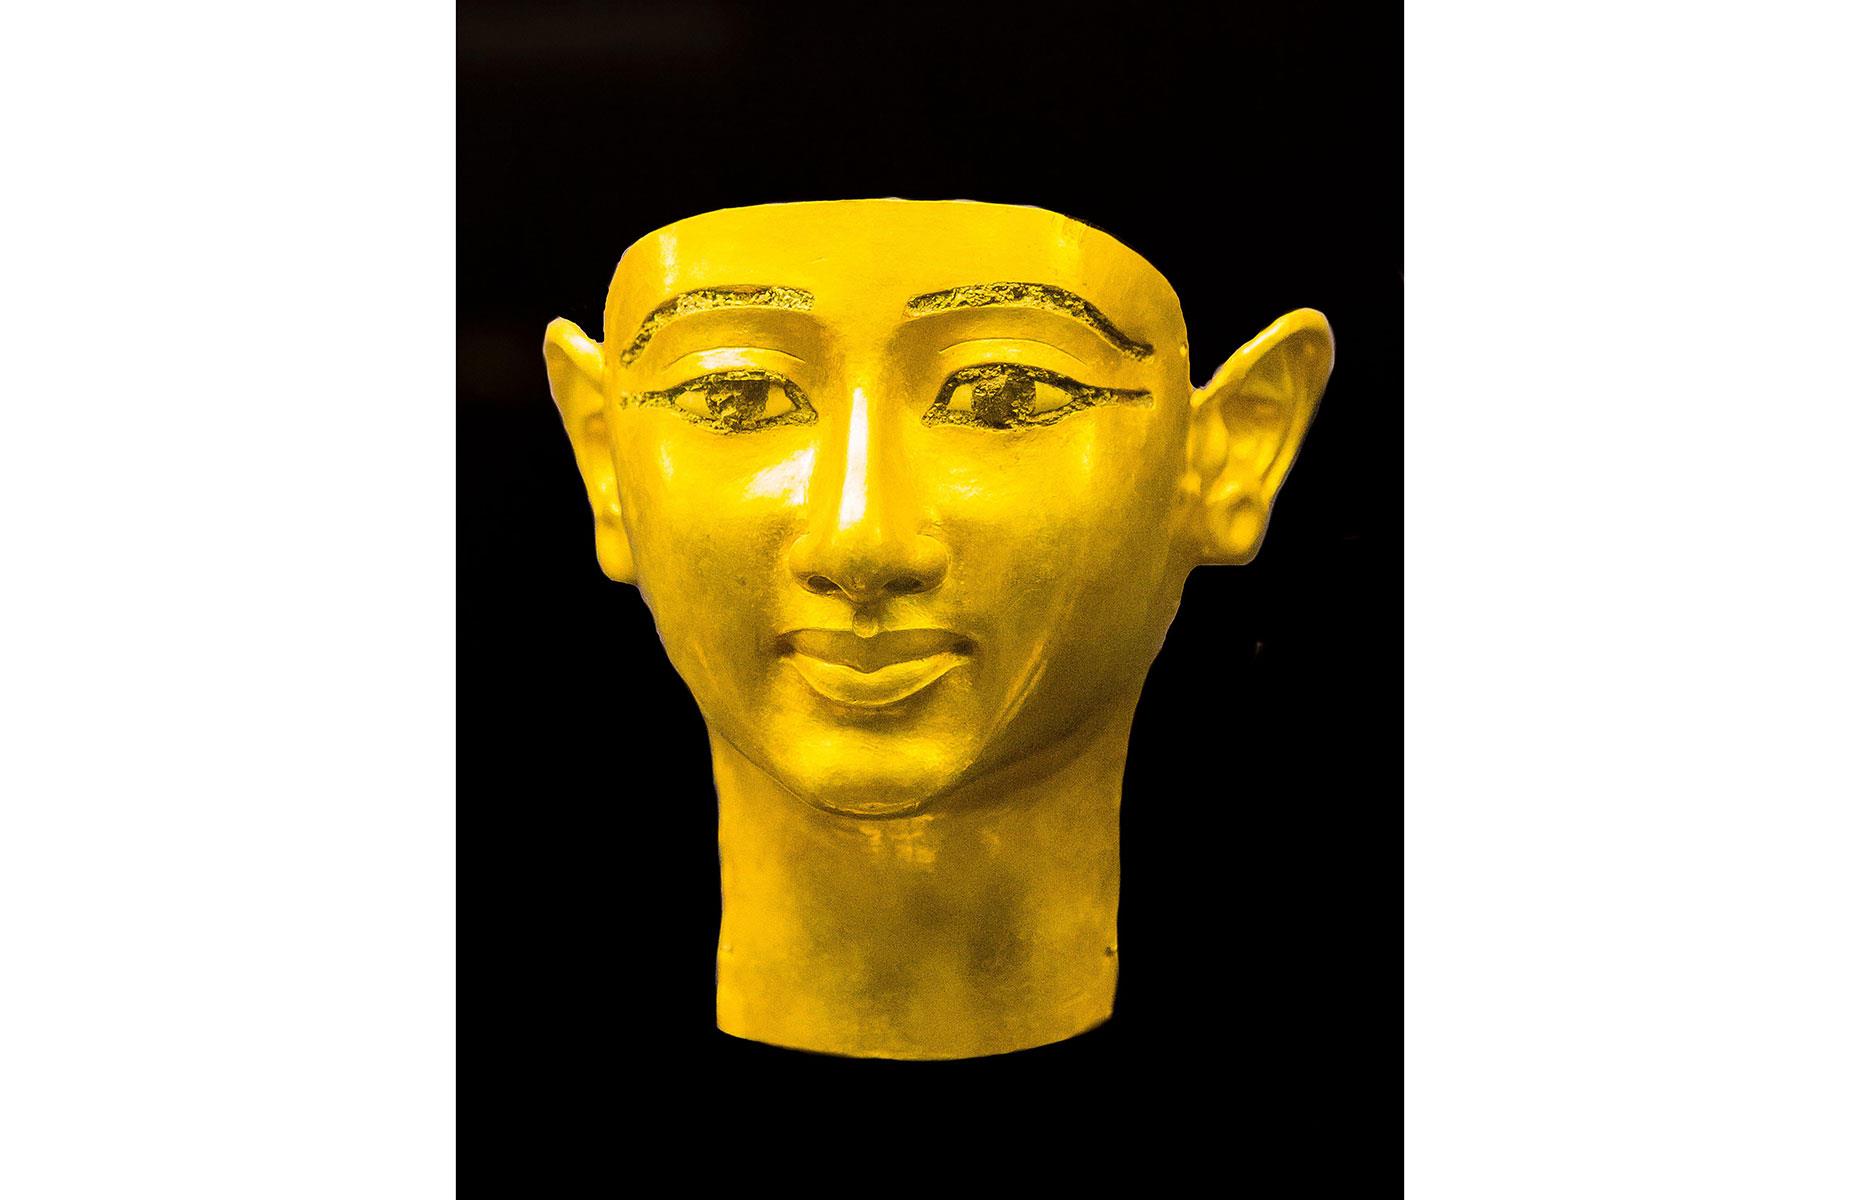 <p>Wendjebauendjed was an army general, high dignitary and high priest during King Psusennes I's reign (circa 1044-994 BC). While Wendjebauendjed wasn't of royal descent, his tomb was uncovered inside the royal necropolis, suggesting that he was a figure of great importance. His funerary mask is detailed with a slight smile and the inlaid eyes are made of glass, but you'll spot that the <a href="https://egypt-museum.com/mummy-mask-of-wendjebauendjed/">ears aren't symmetrical</a>; the left protrudes further than the right.</p>  <p><a href="https://www.loveexploring.com/galleries/153895/hidden-bunkers-and-abandoned-stations-secrets-of-the-london-underground?page=1"><strong>See the secrets of the London Underground</strong></a></p>